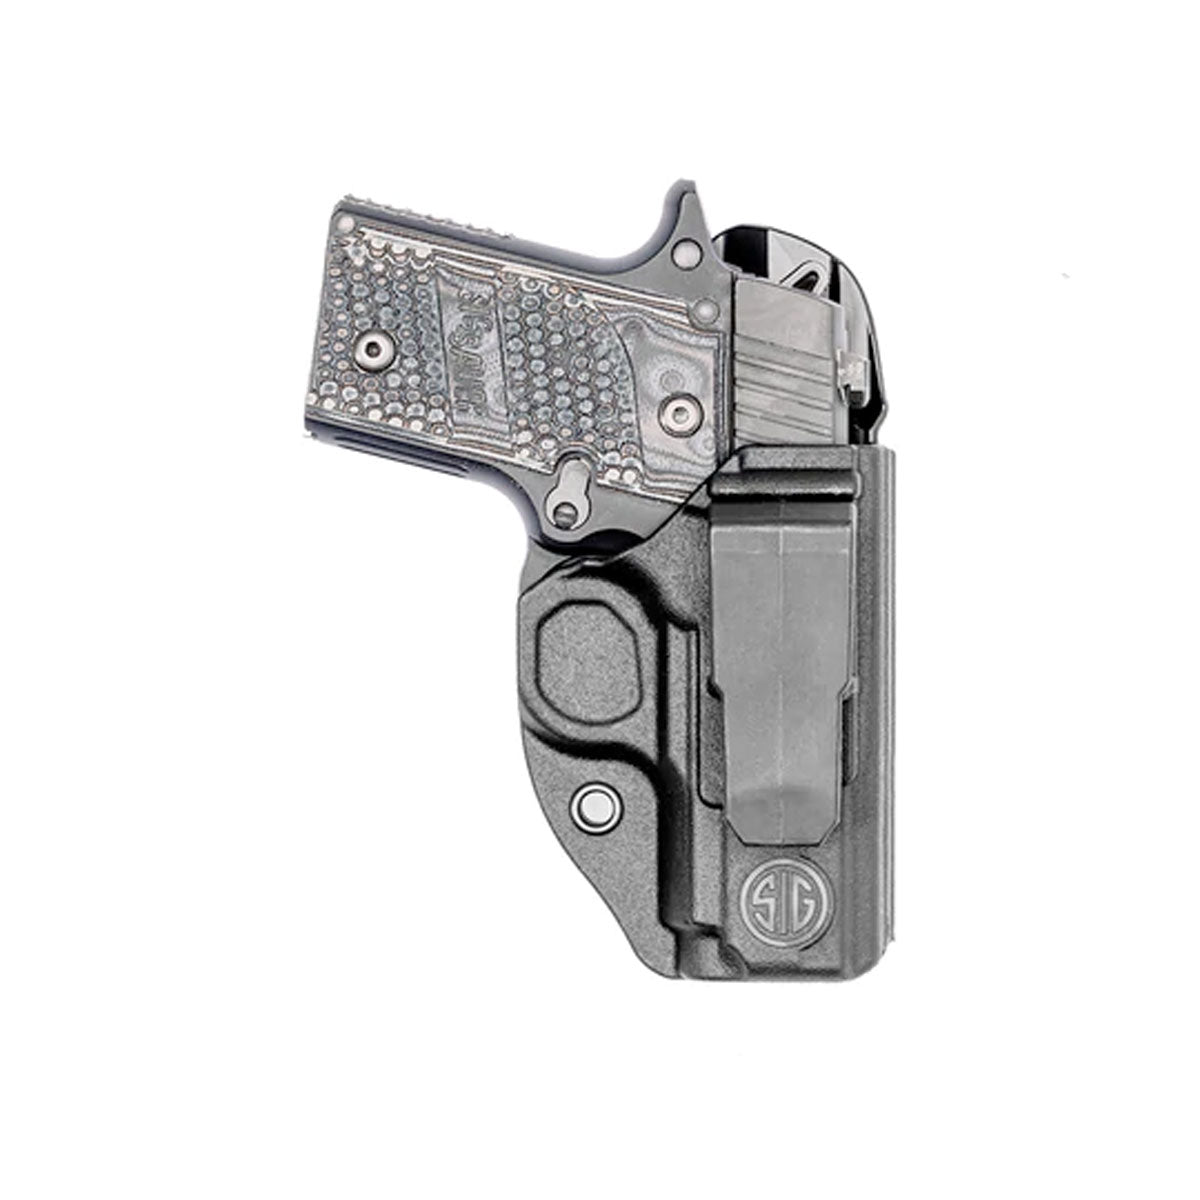 Blade-Tech Klipt IWB Holster Black Right Hand Only Holsters Blade-Tech Holsters Sig P238 Tactical Gear Supplier Tactical Distributors Australia